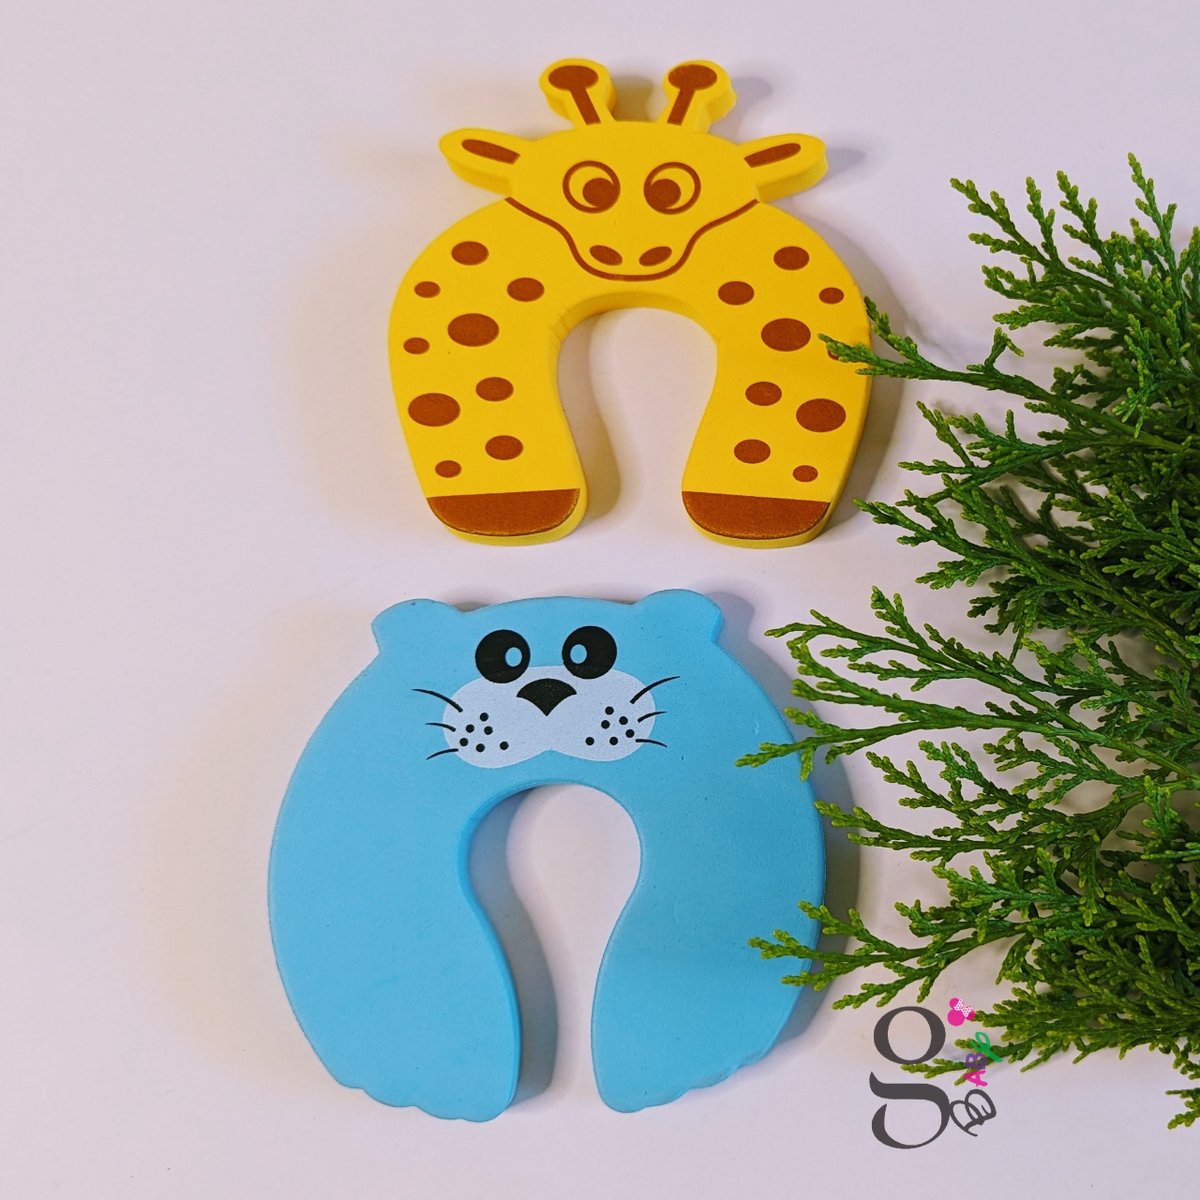 Super Cute Animals. Each door stopper comes with a different design. Children absolutely love these cute and bright little animals. UGX: 20.000 ( pack of 4) #doorstoppers #doors #safety #kampalauganda #motherandbaby #comfortfirst #safetyalways #baby #babyshower #babyshop